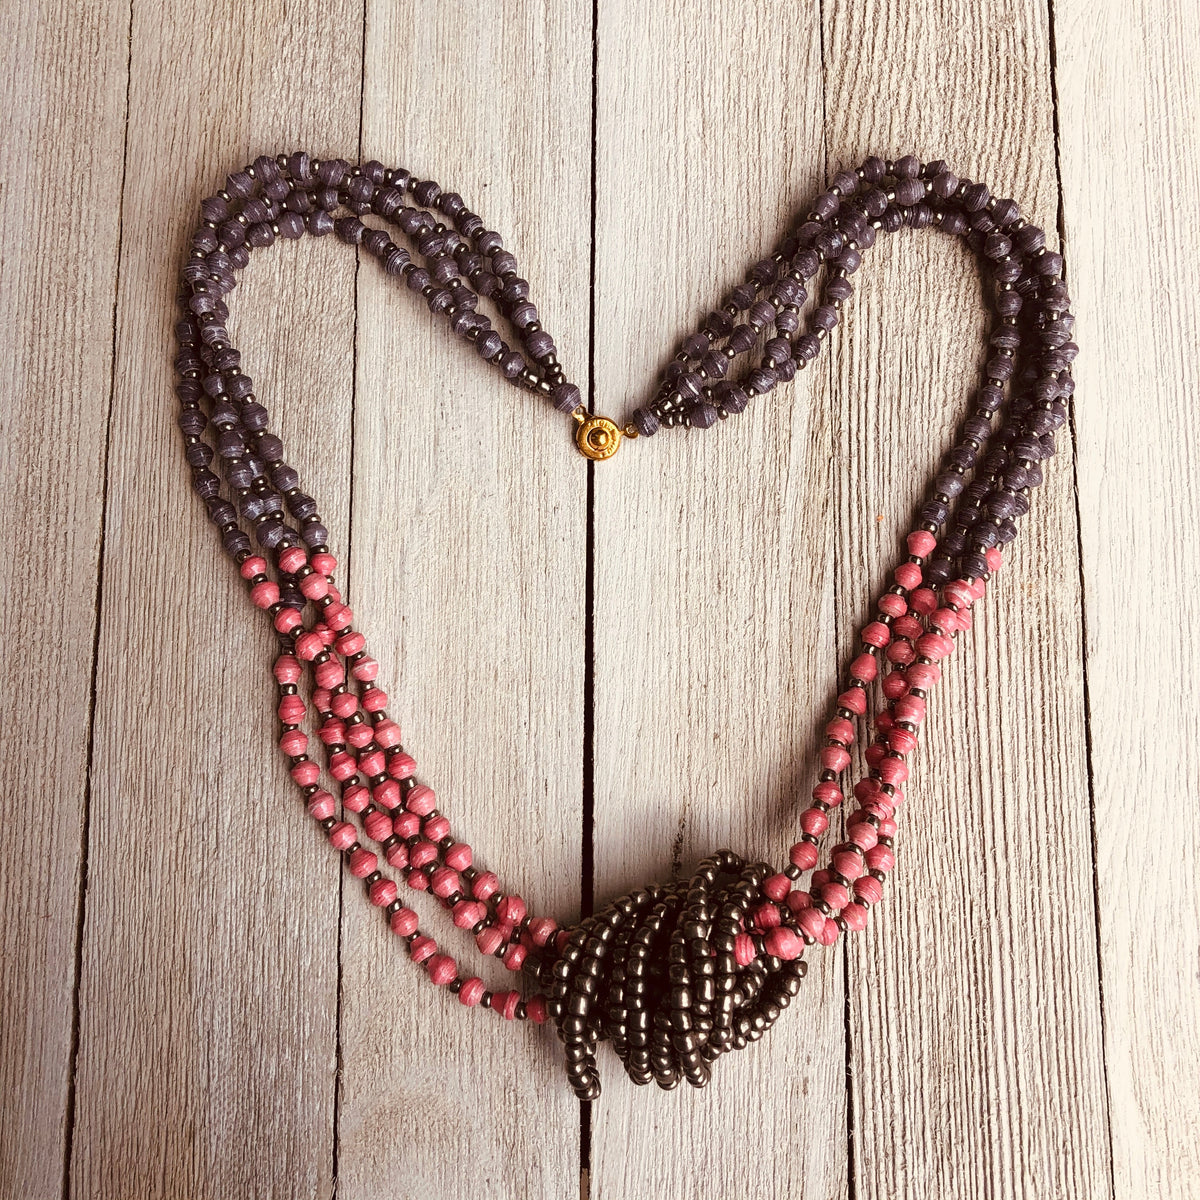 Unique Signature Handmade Beaded Multi Strand Necklace with Knot (Mult